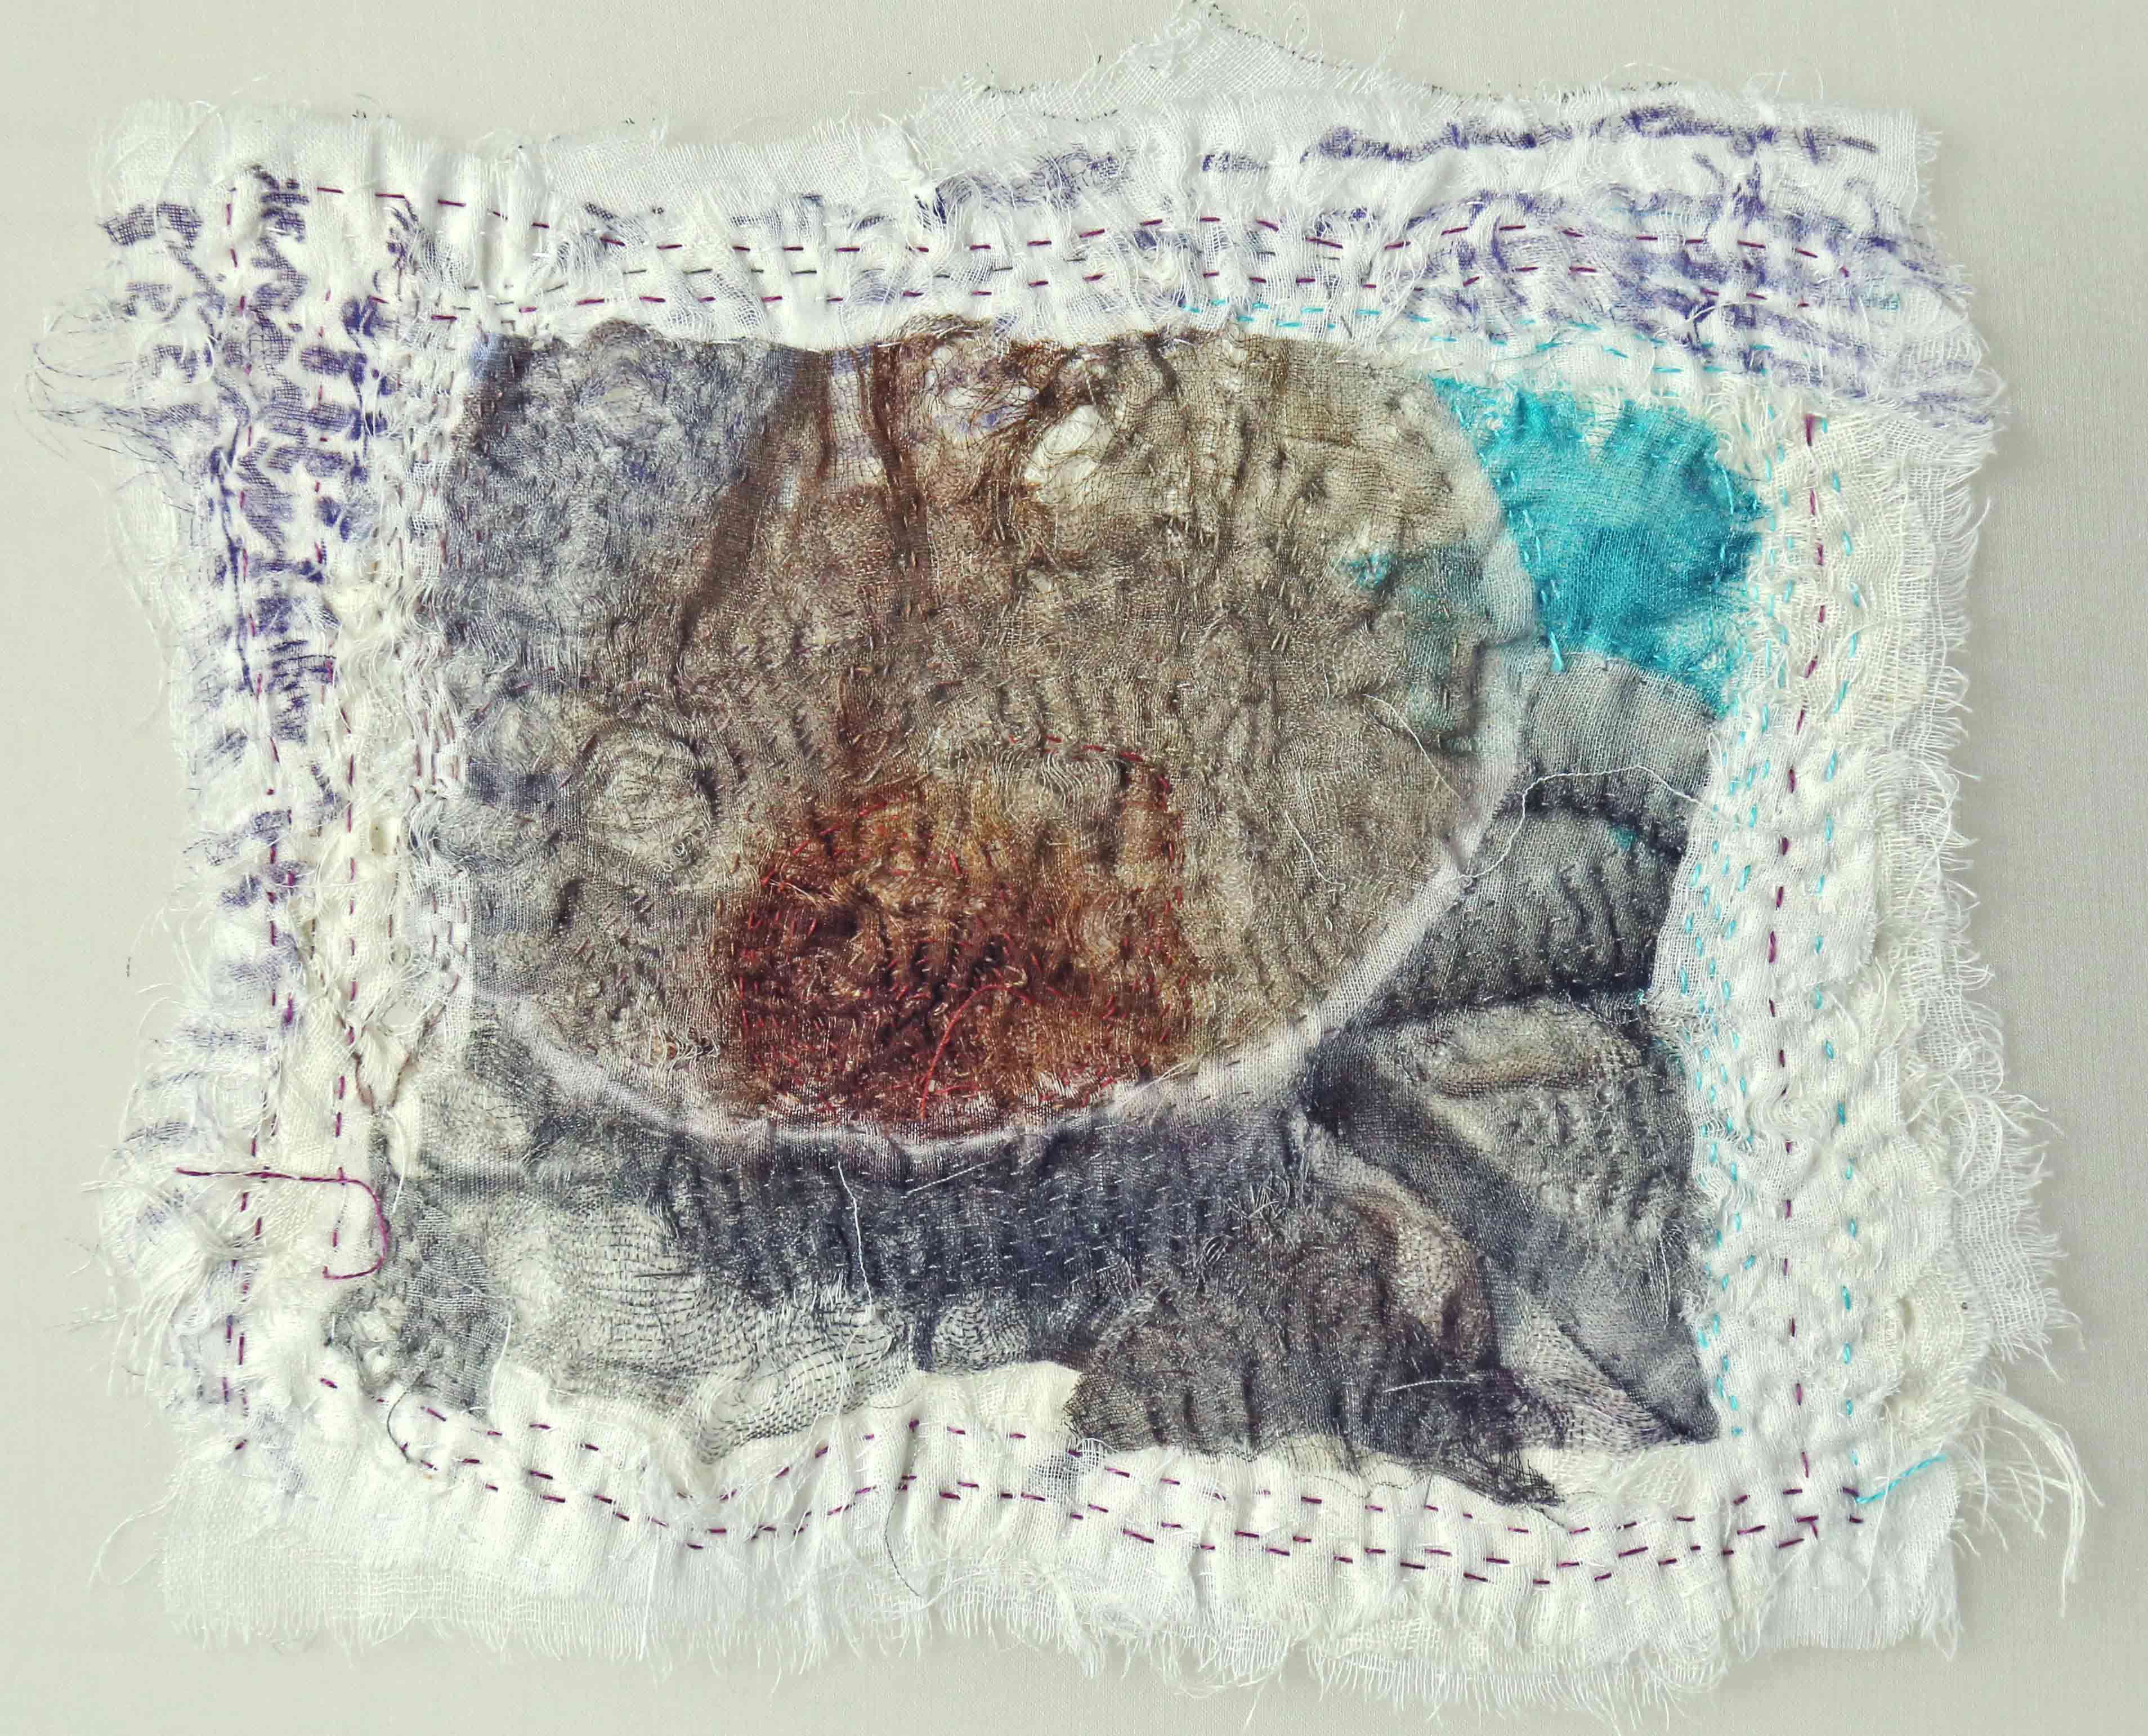 Dregs in Your Tea-cup I, 2010 [6.5 X 7.5 inches - unframed] Materials: cotton voile, cotton floss, cotton-polyester thread, Technique: photography, digital printing, tearing, layering, stitching, embroidery